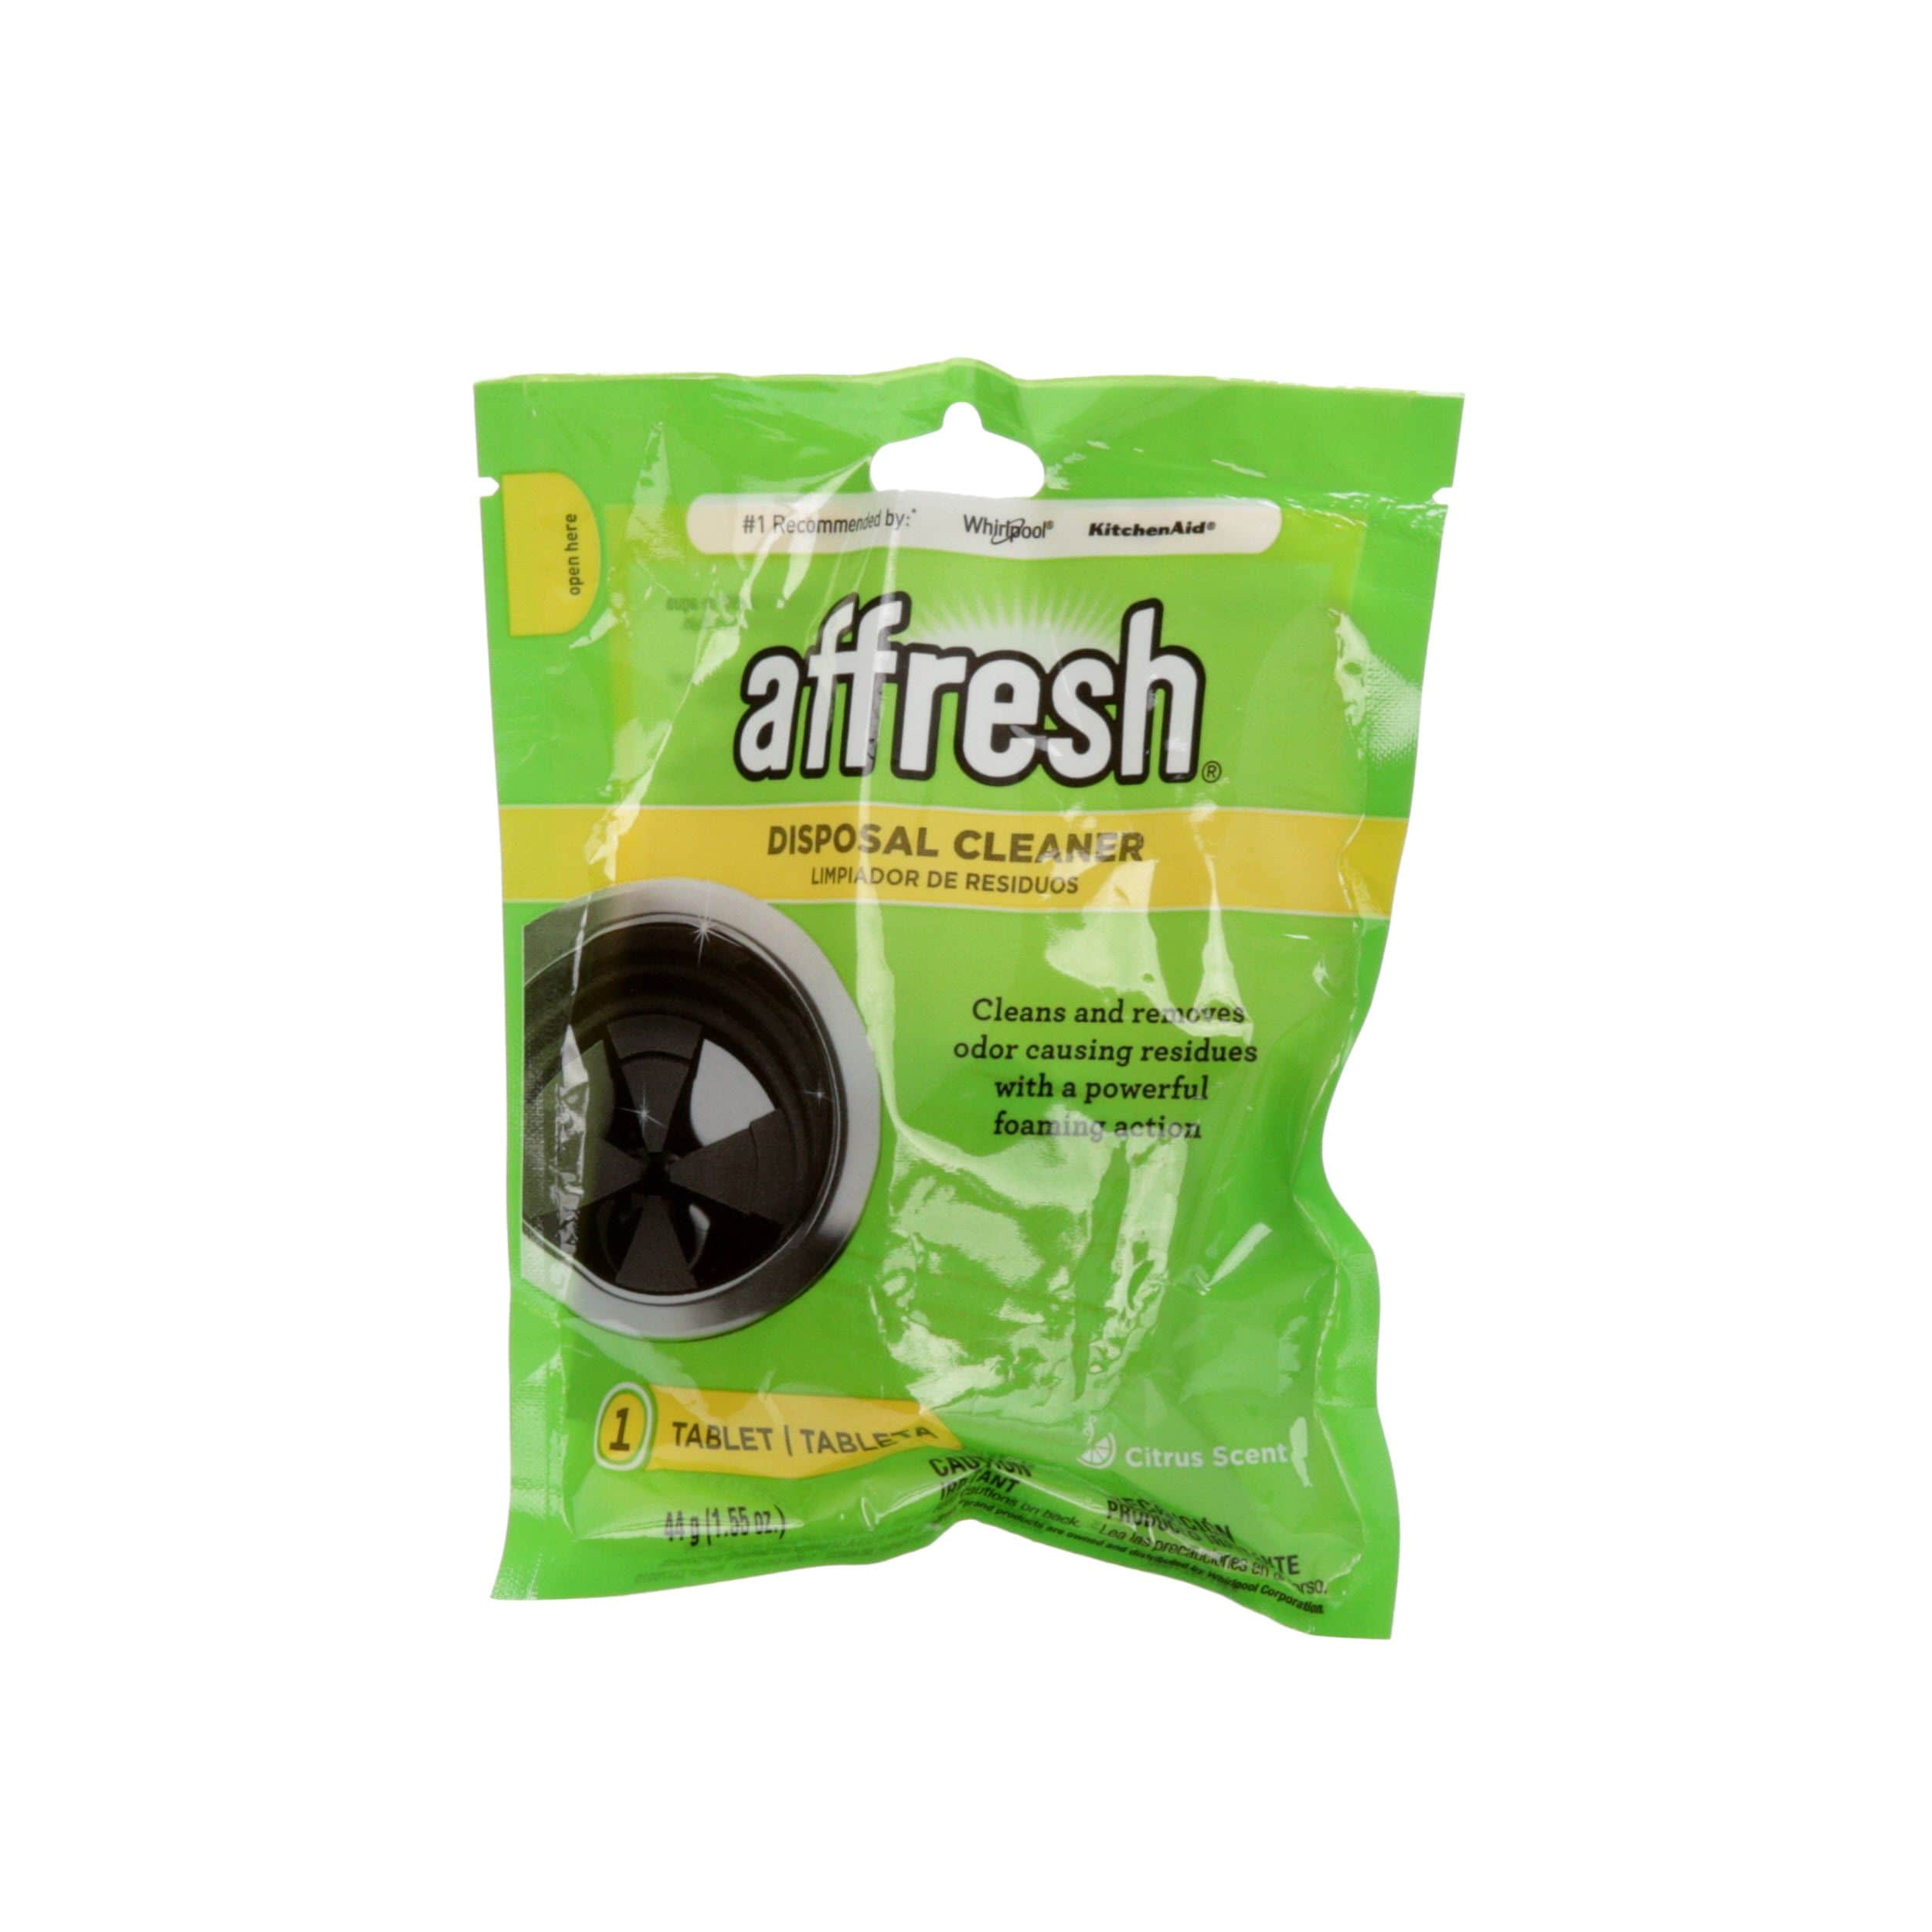 Brand New Lot of 6 AFFRESH Garbage Disposal Cleaning Tablets W10921680 Citrus 